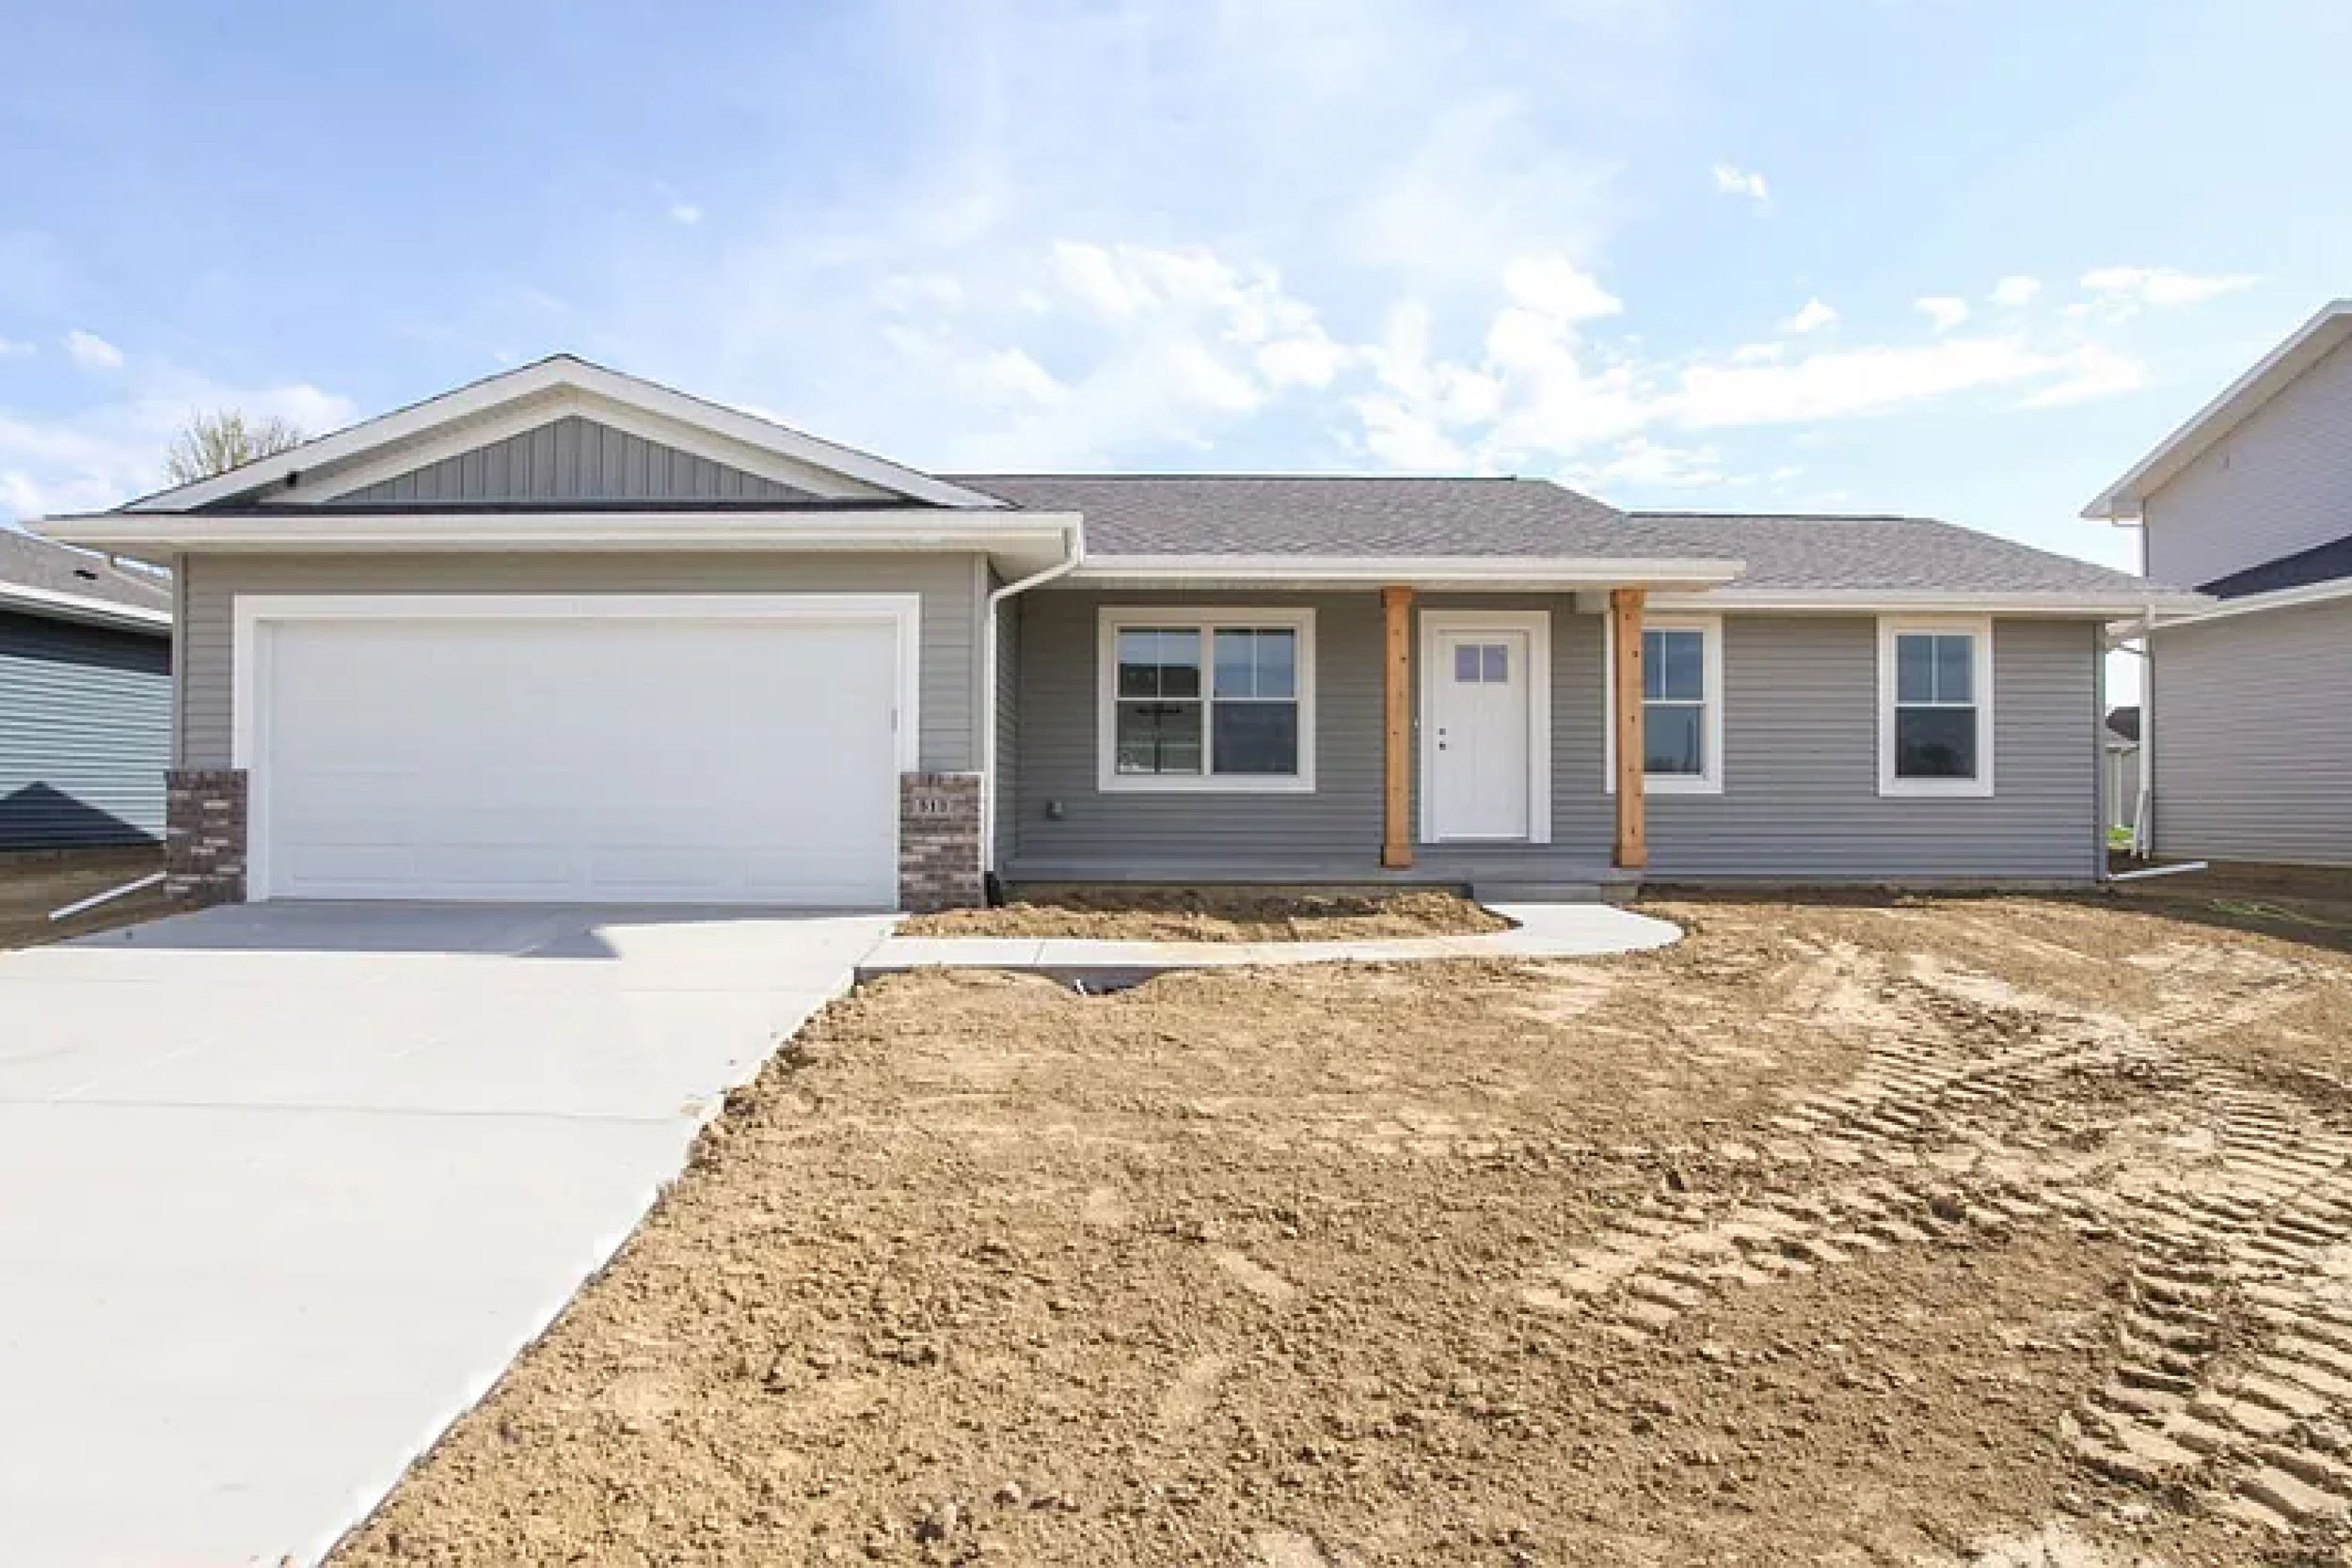 home builder, new construction homes, builder, Bloomington, Normal, Illinois, new construction homes near me, Home builders near me, realtor, new homes, new houses, Our Communities